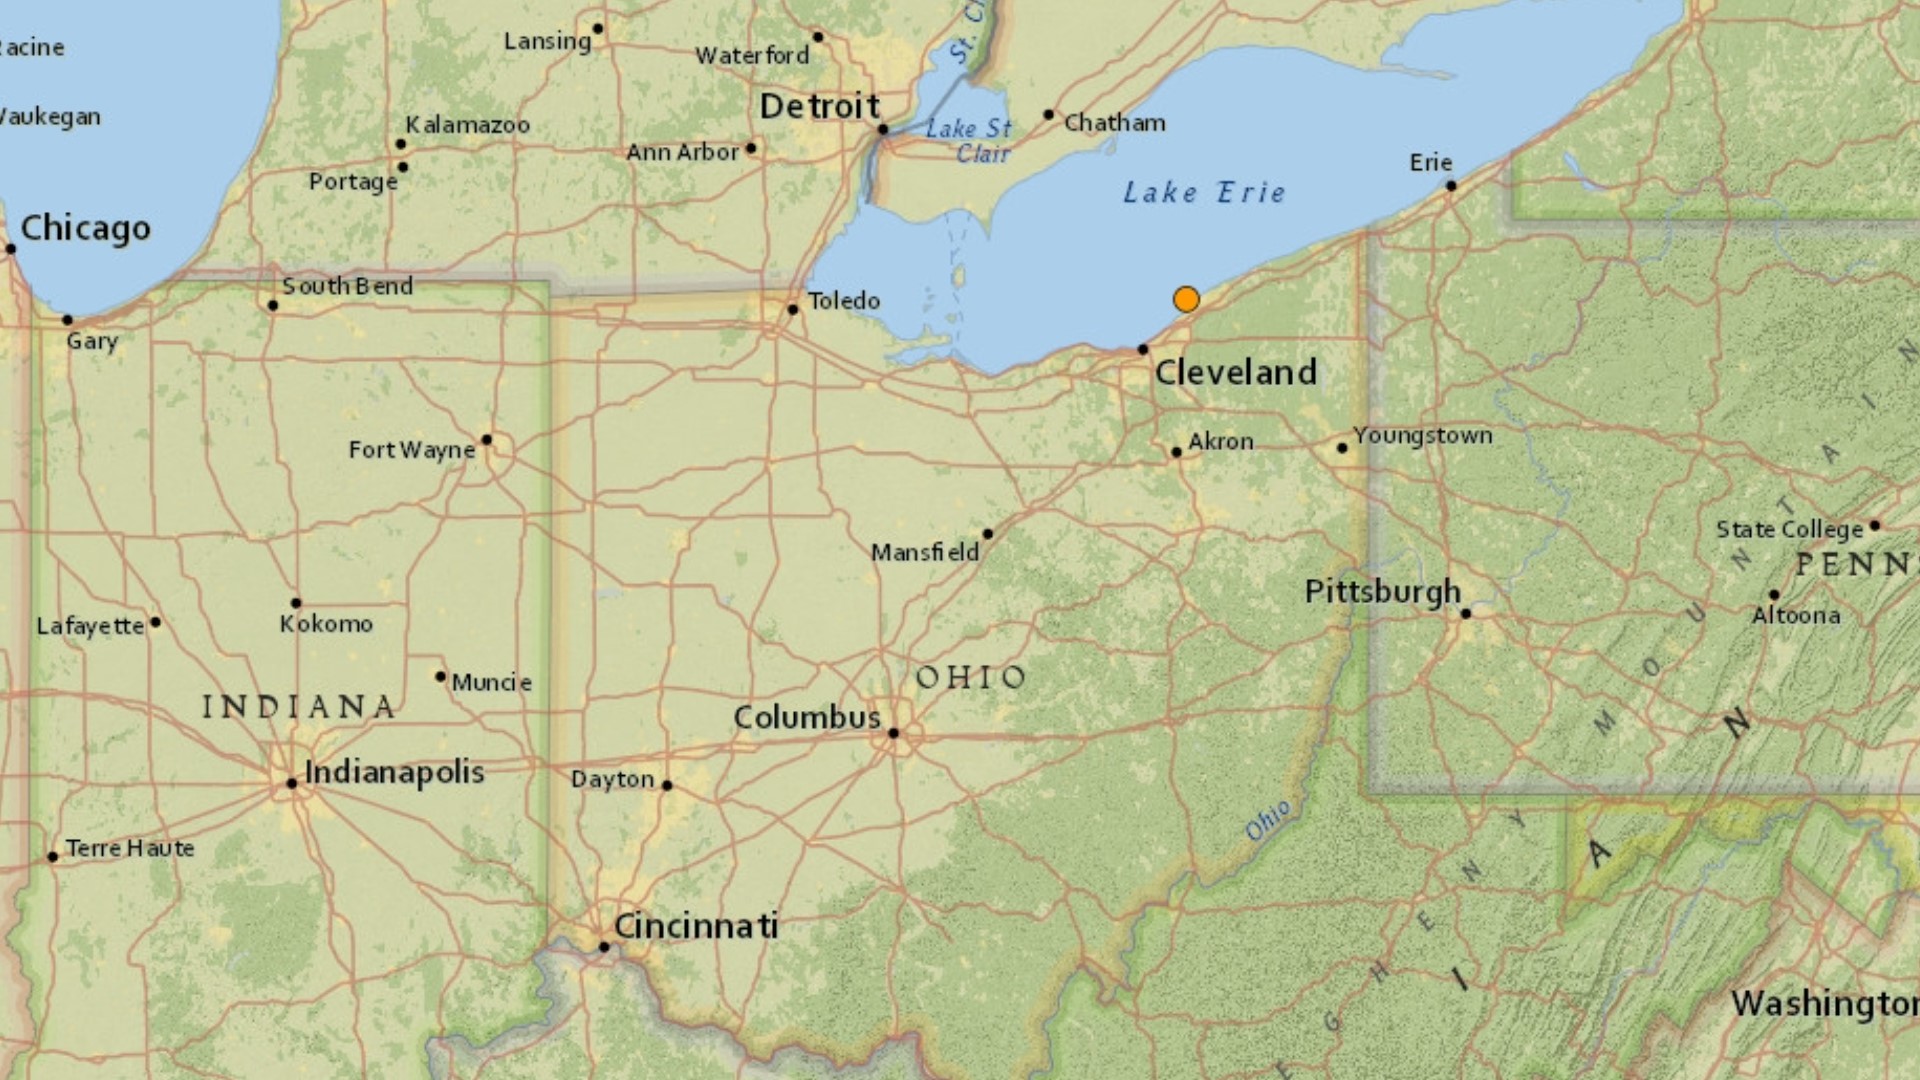 The earthquake was reported roughly 3 kilometers northwest of Timberlake, near the edge of Lake Erie.